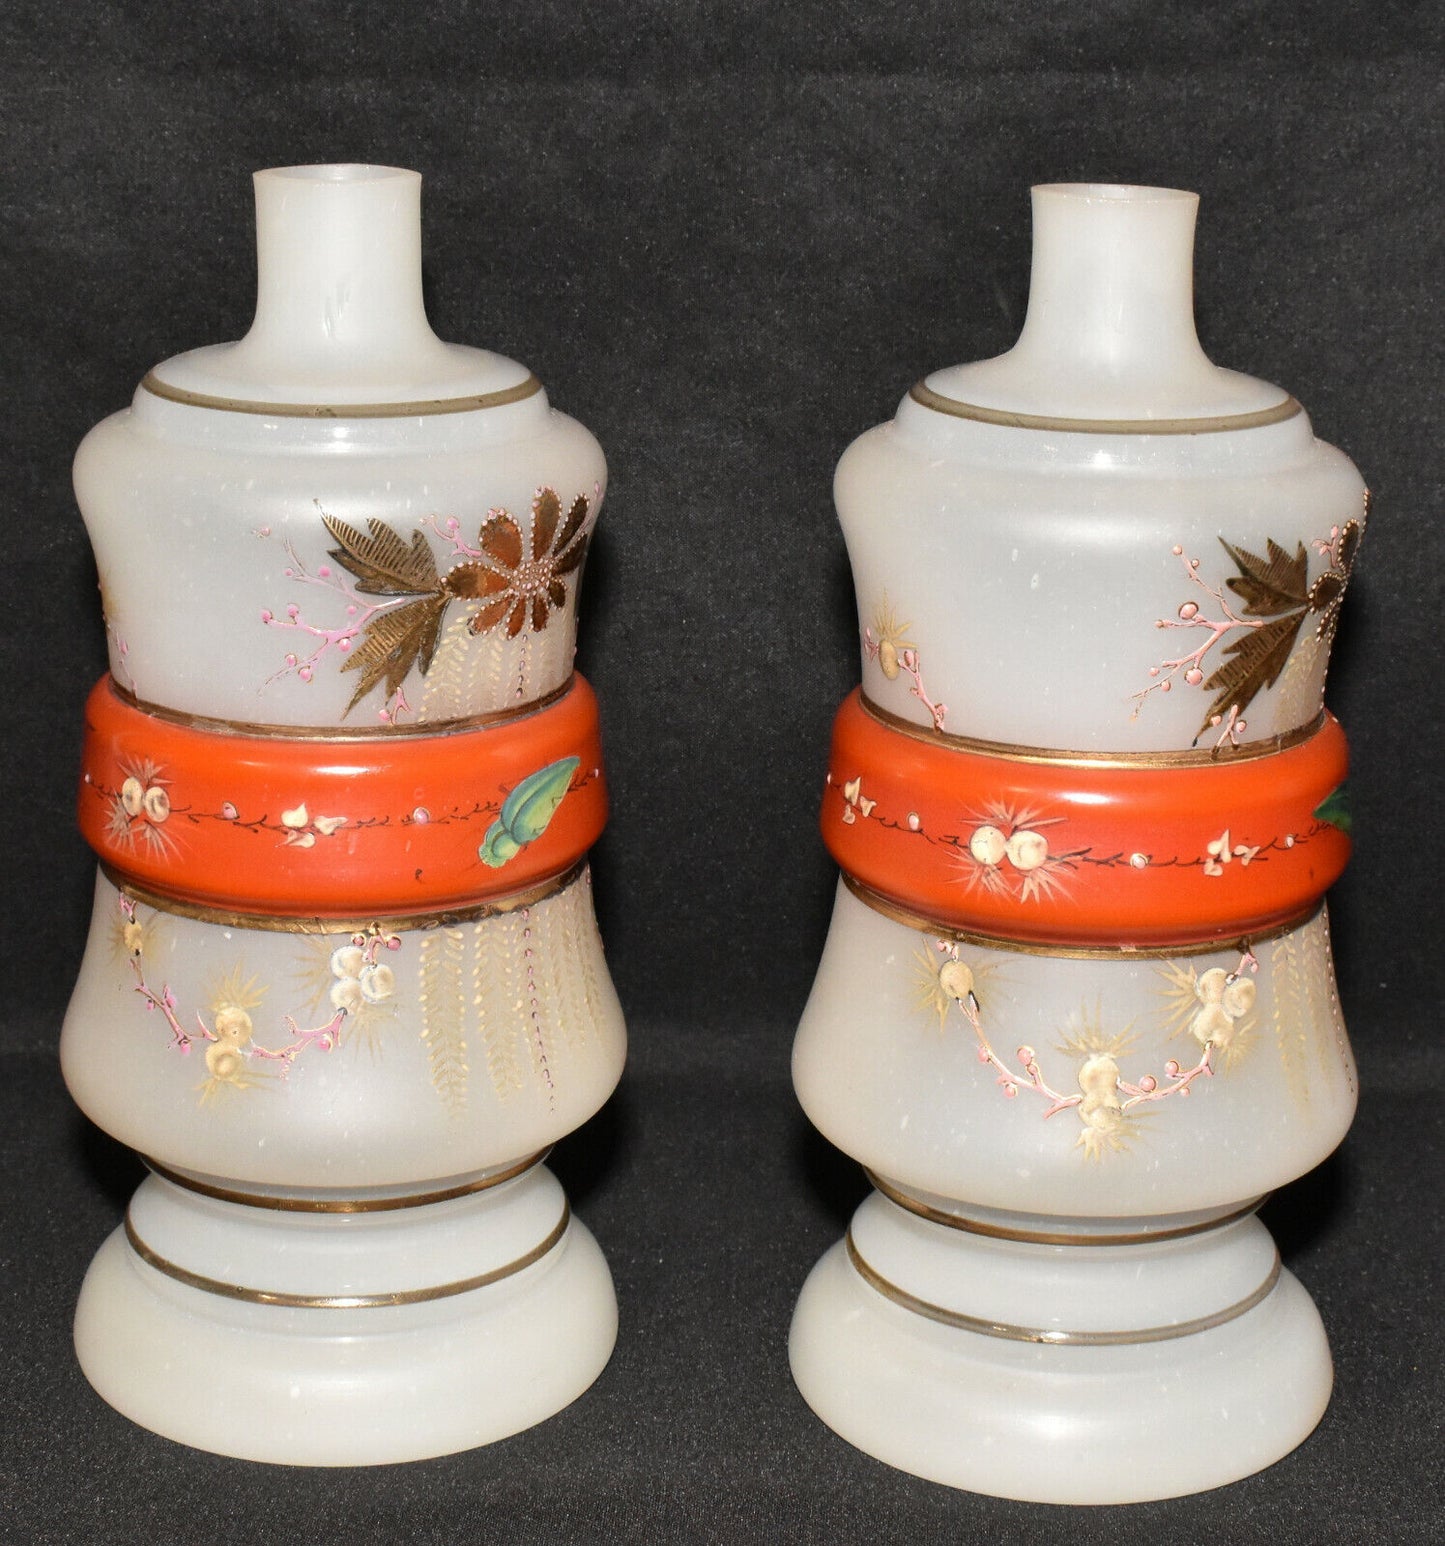 Pair Vintage Art Deco Hand Decorated Kerosene Oil Lamps Frosted Hand-Blown Glass